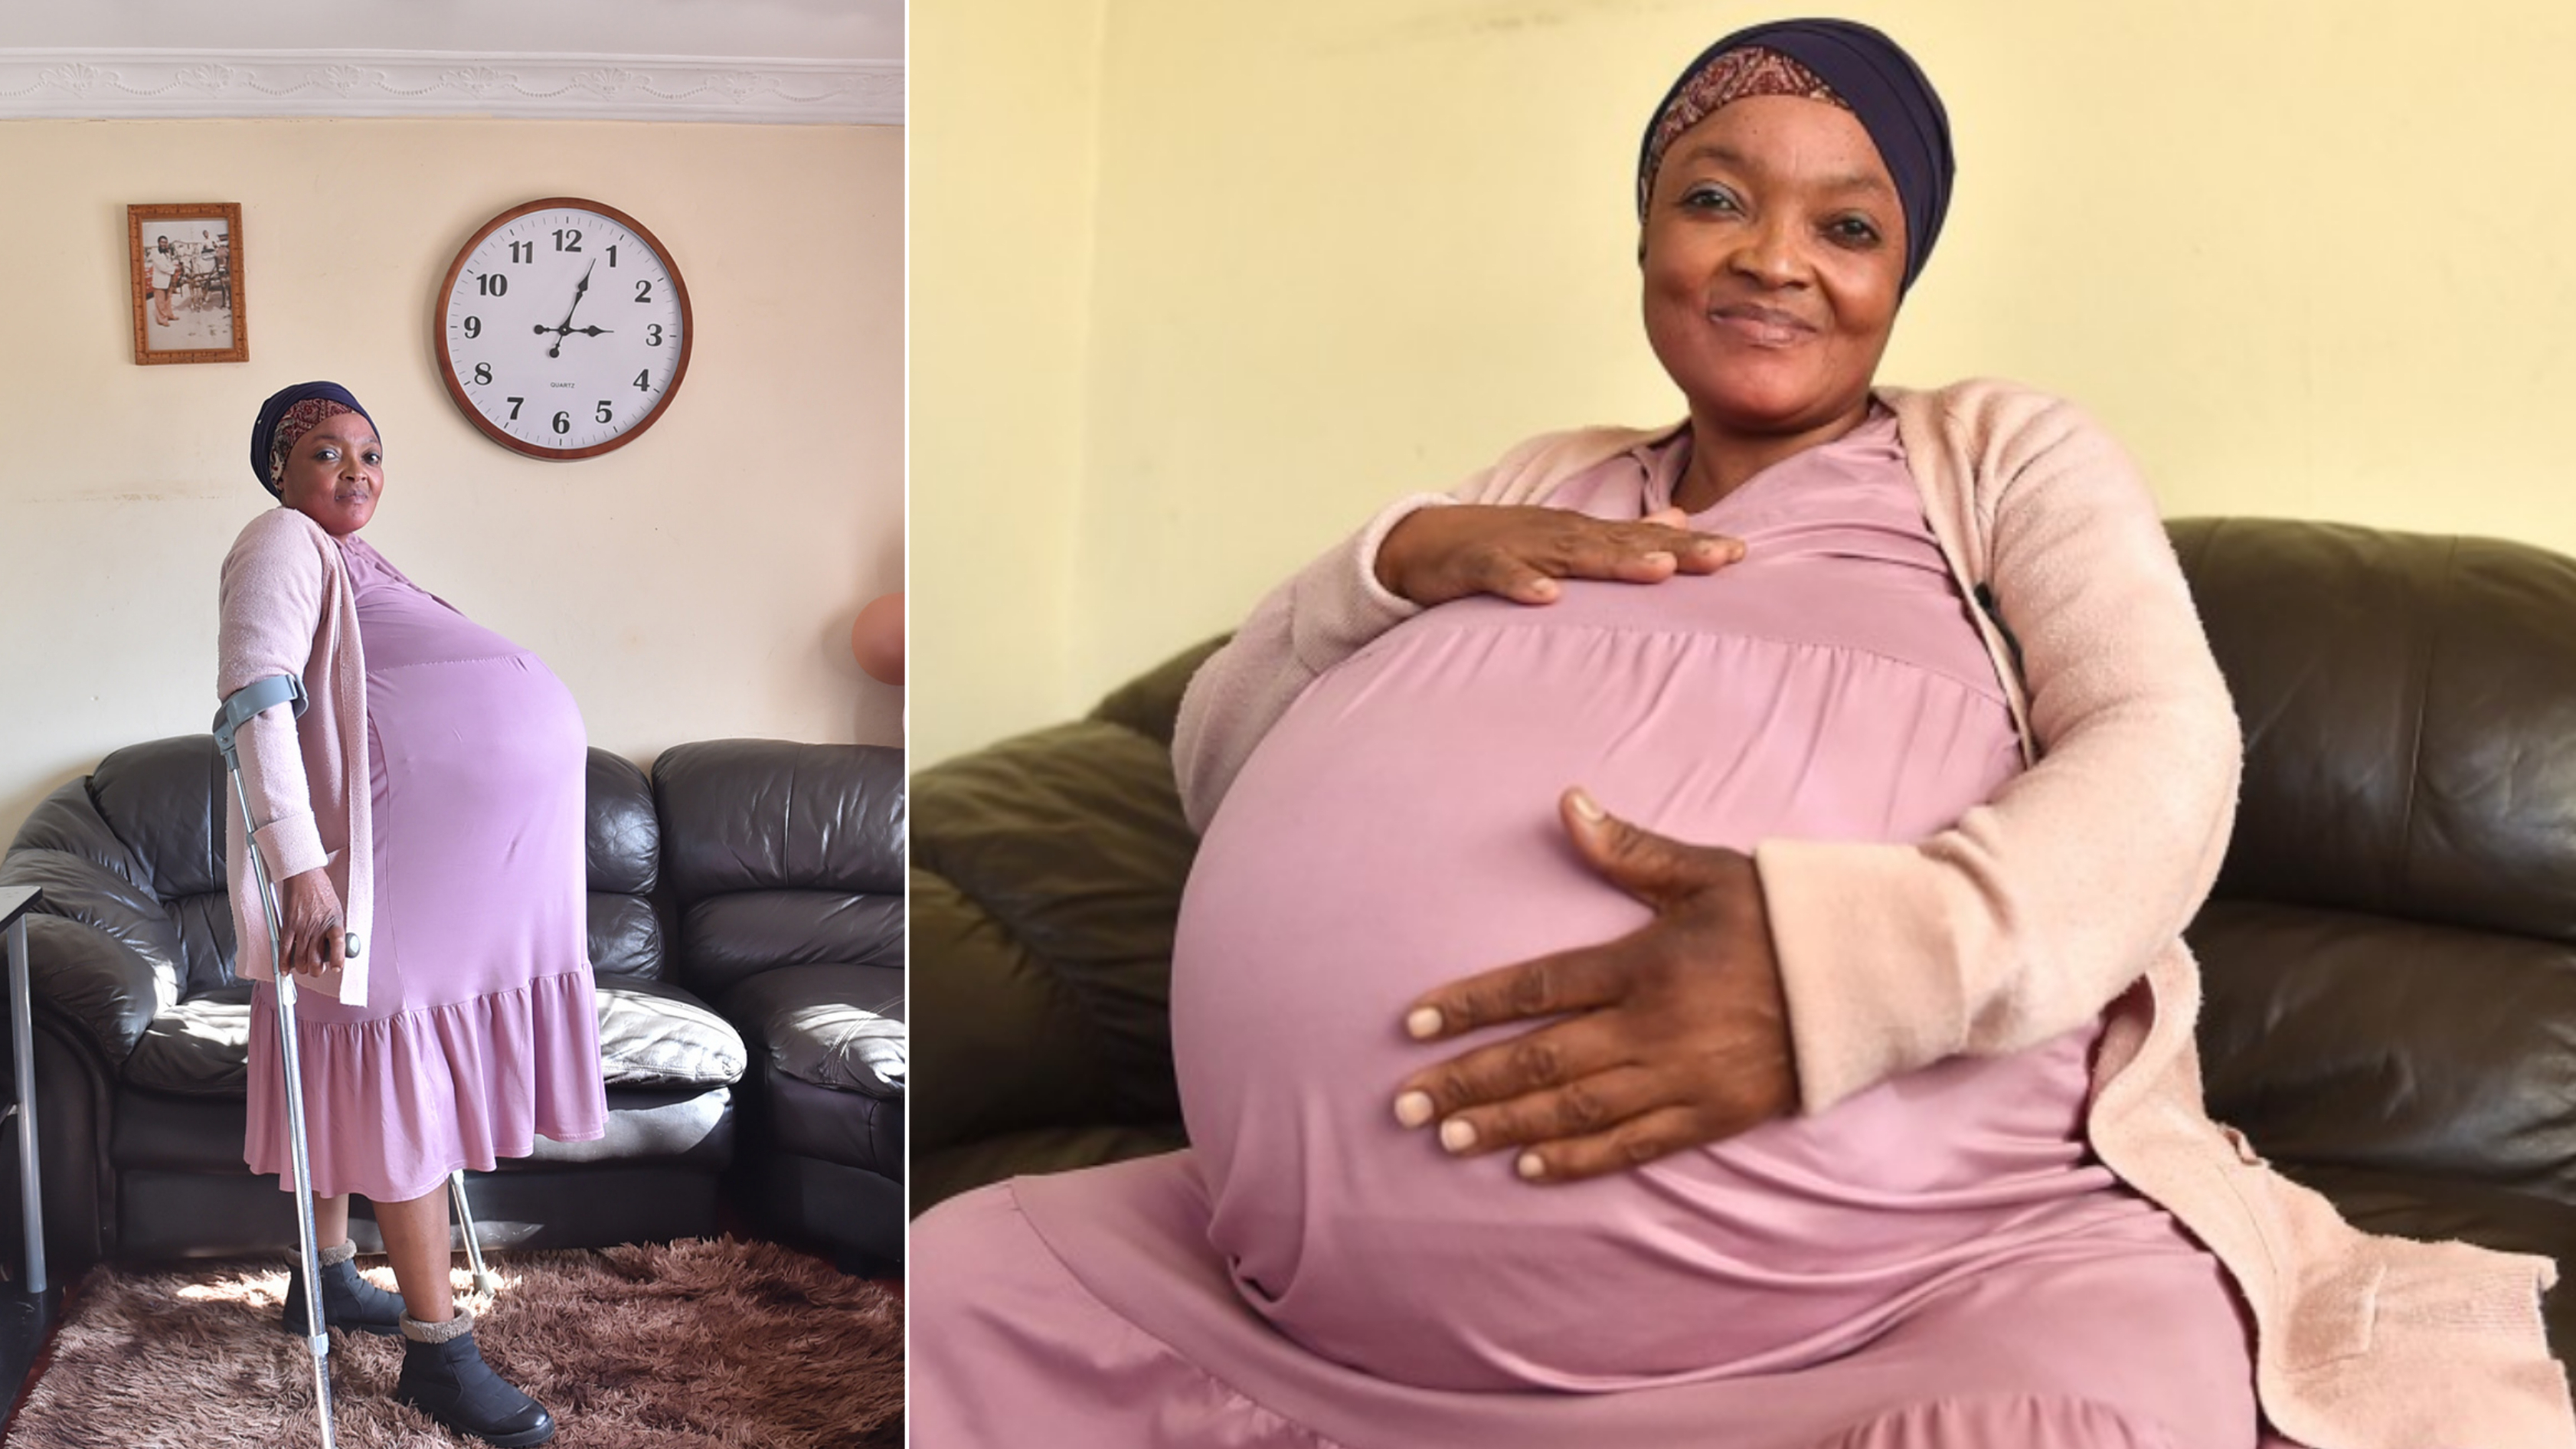 South African Woman’s Claim About Giving Birth to 10 babies is Fake